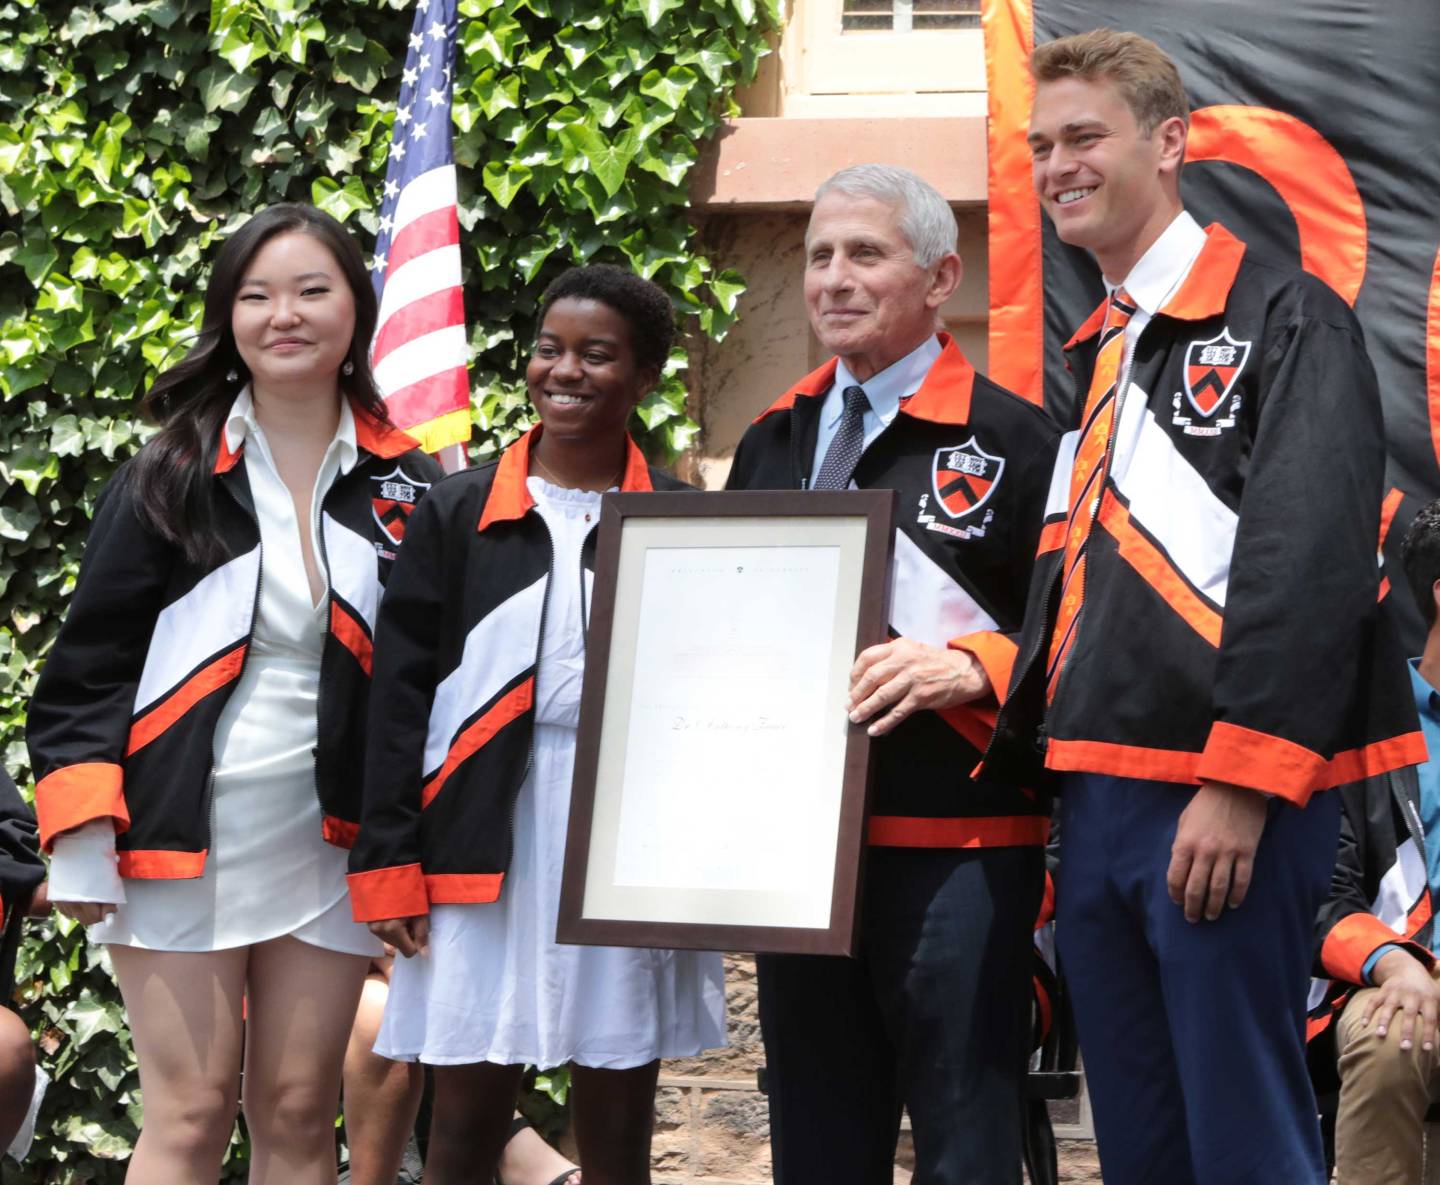 Dr. Fauci poses with members of the Class of 2022 with his honorary class jacket